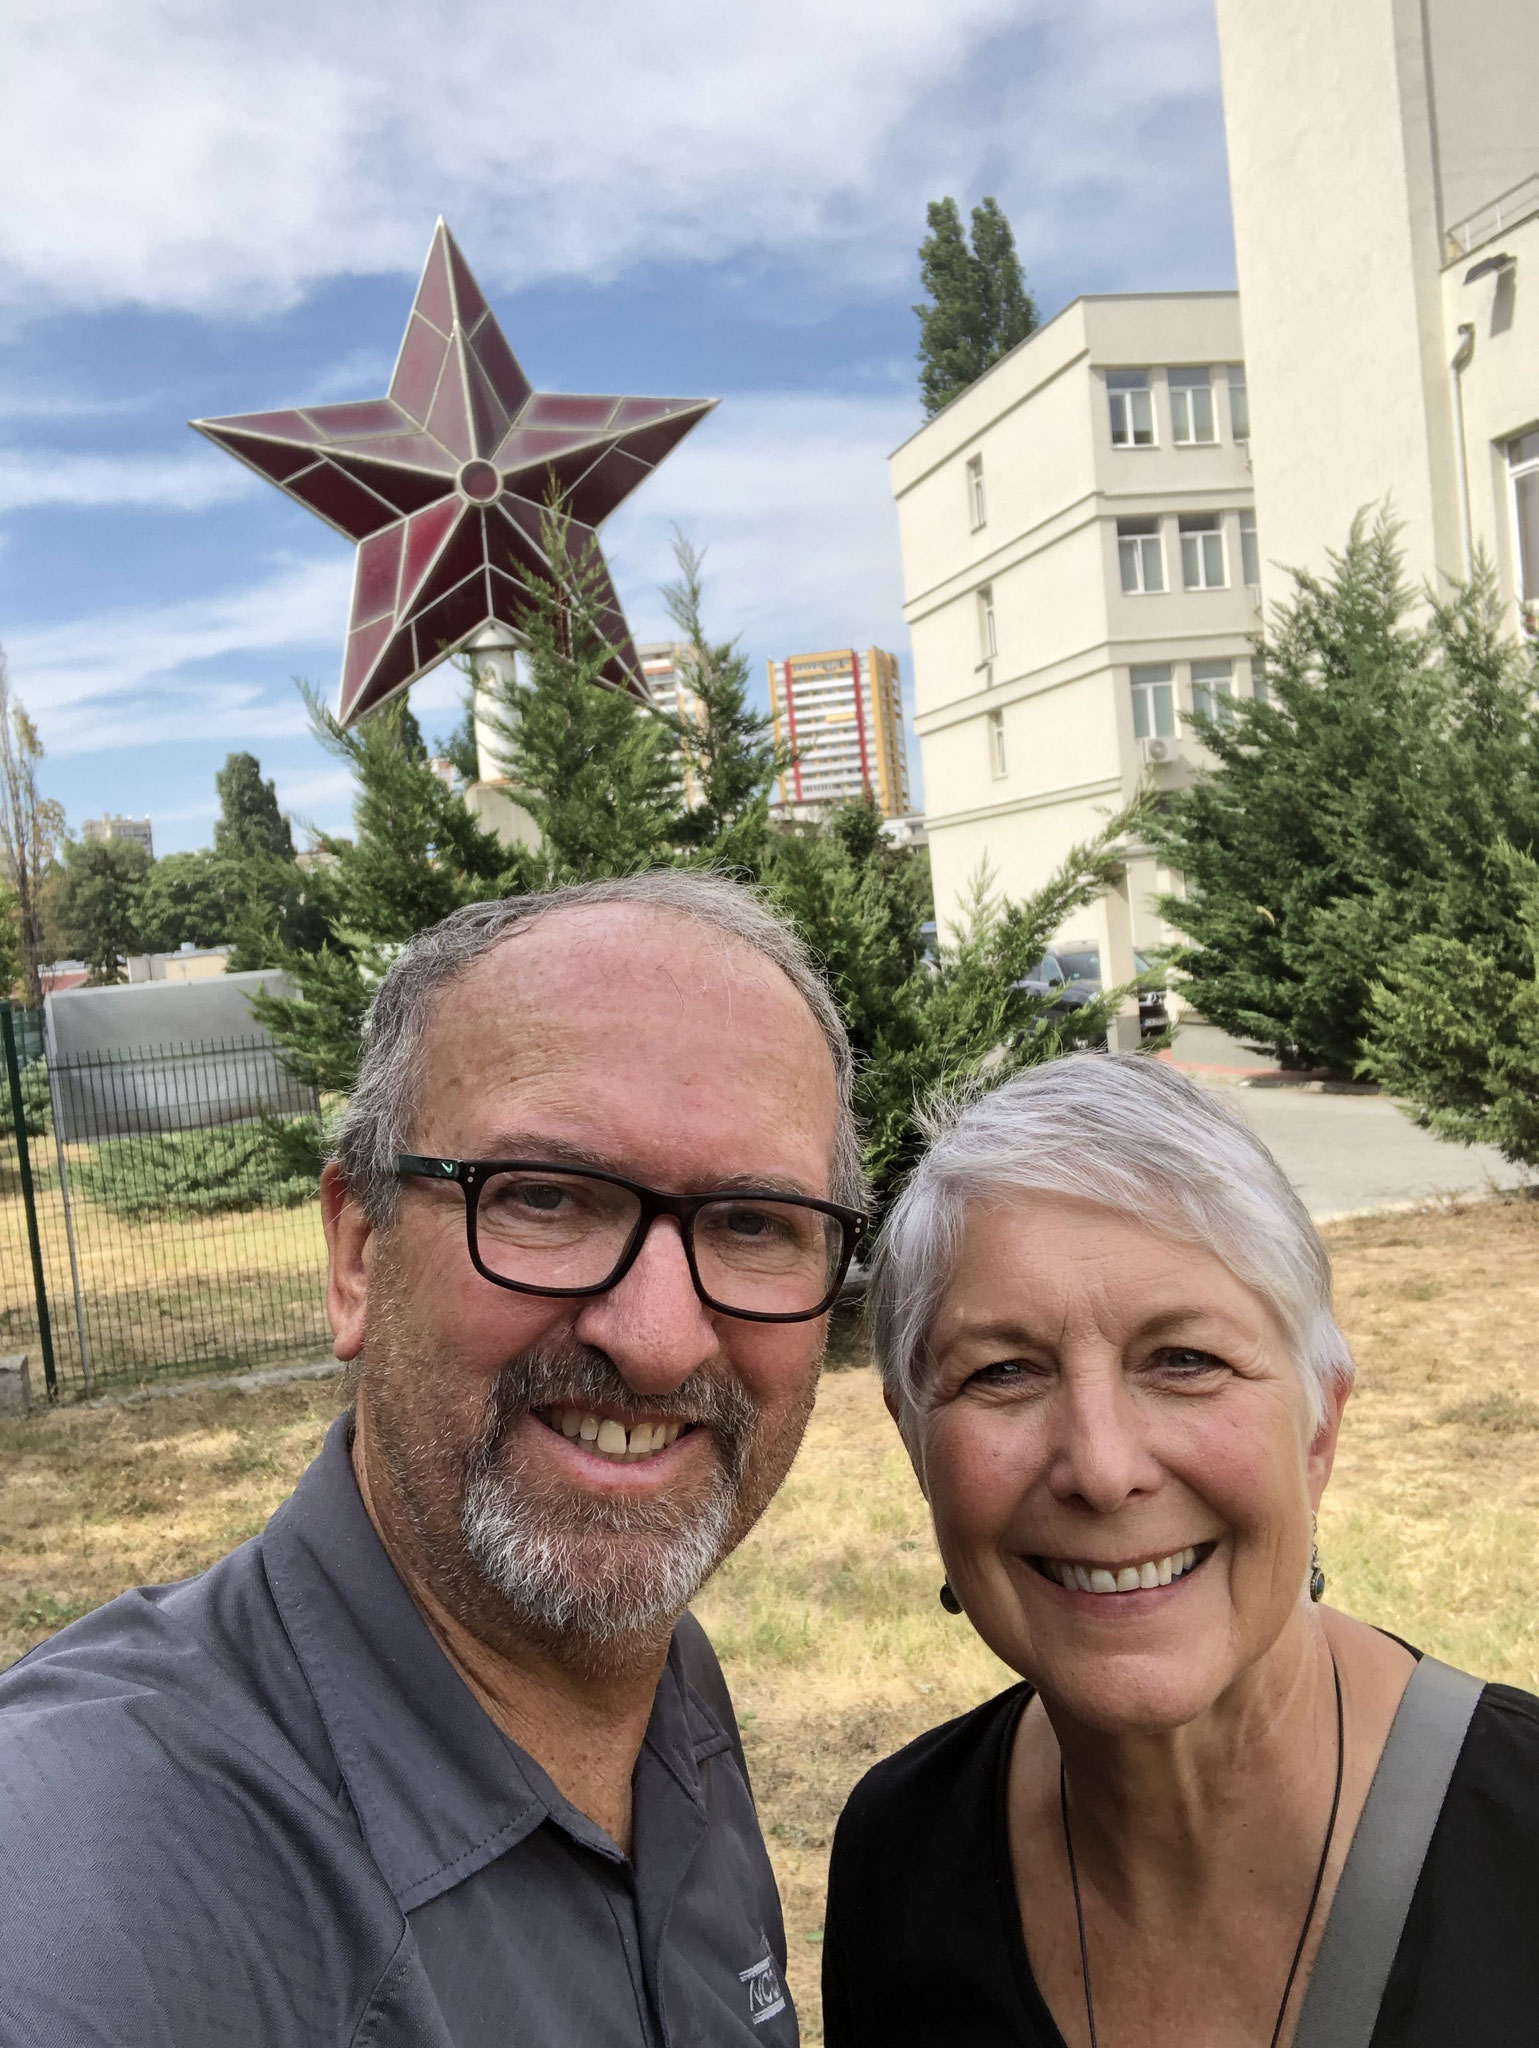 Had an afternoon to visit the Museum of Socialist Art in Sophia. This star used to be on the Communist headquarters building.